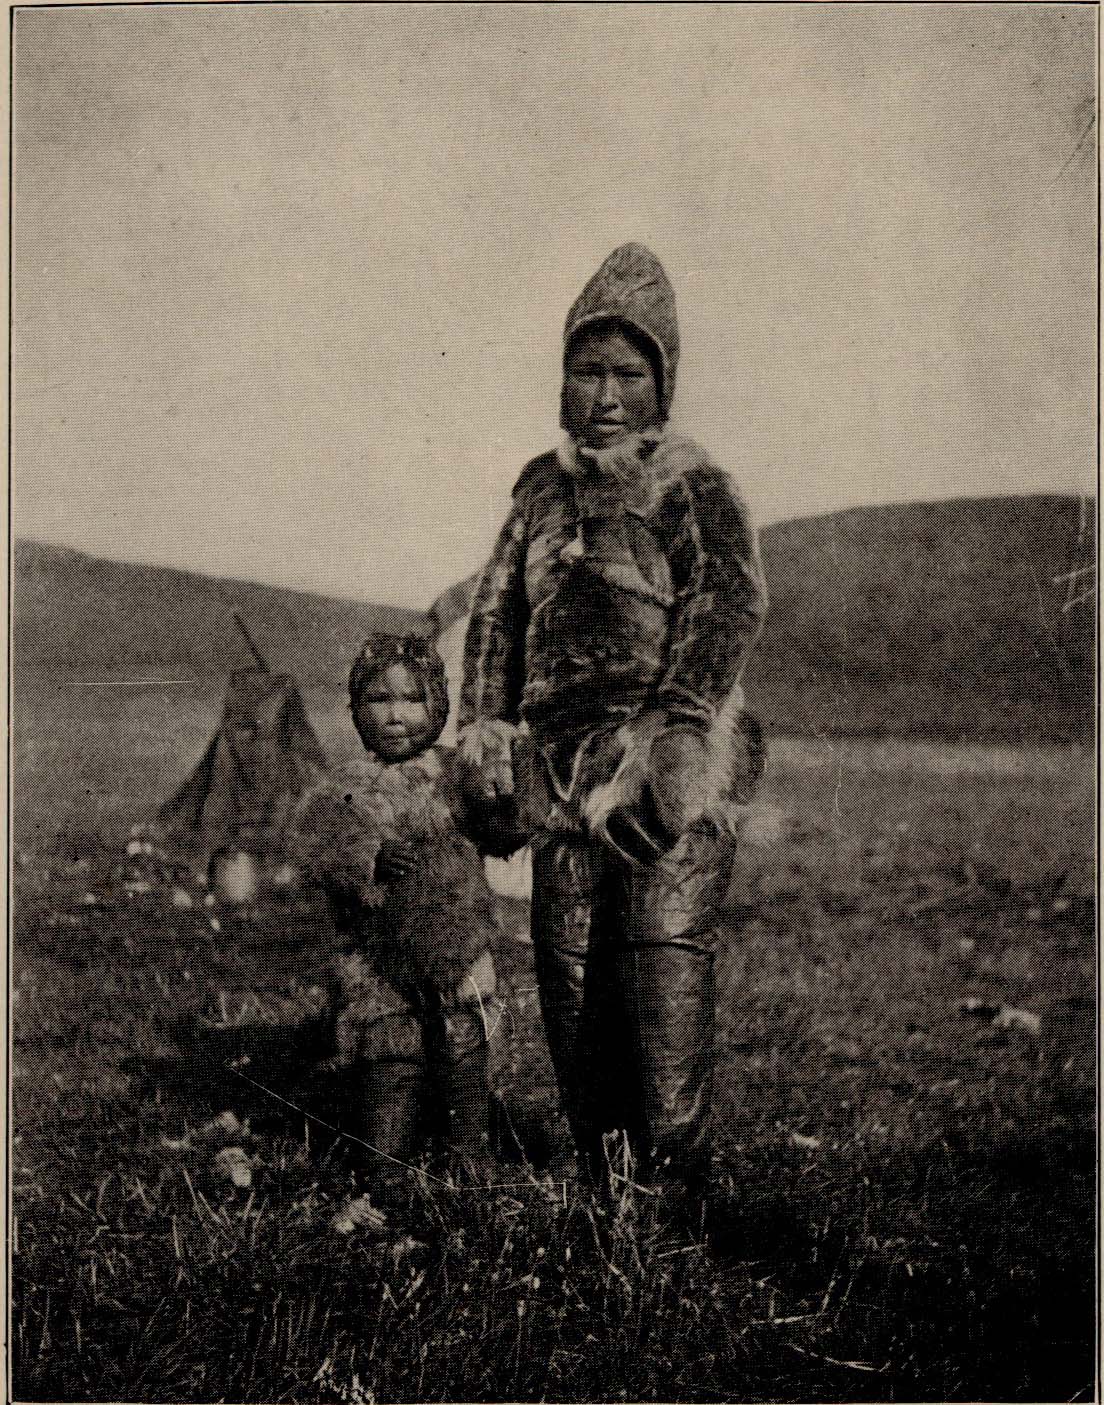 Child and adult woman outside wearing heavy clothing.